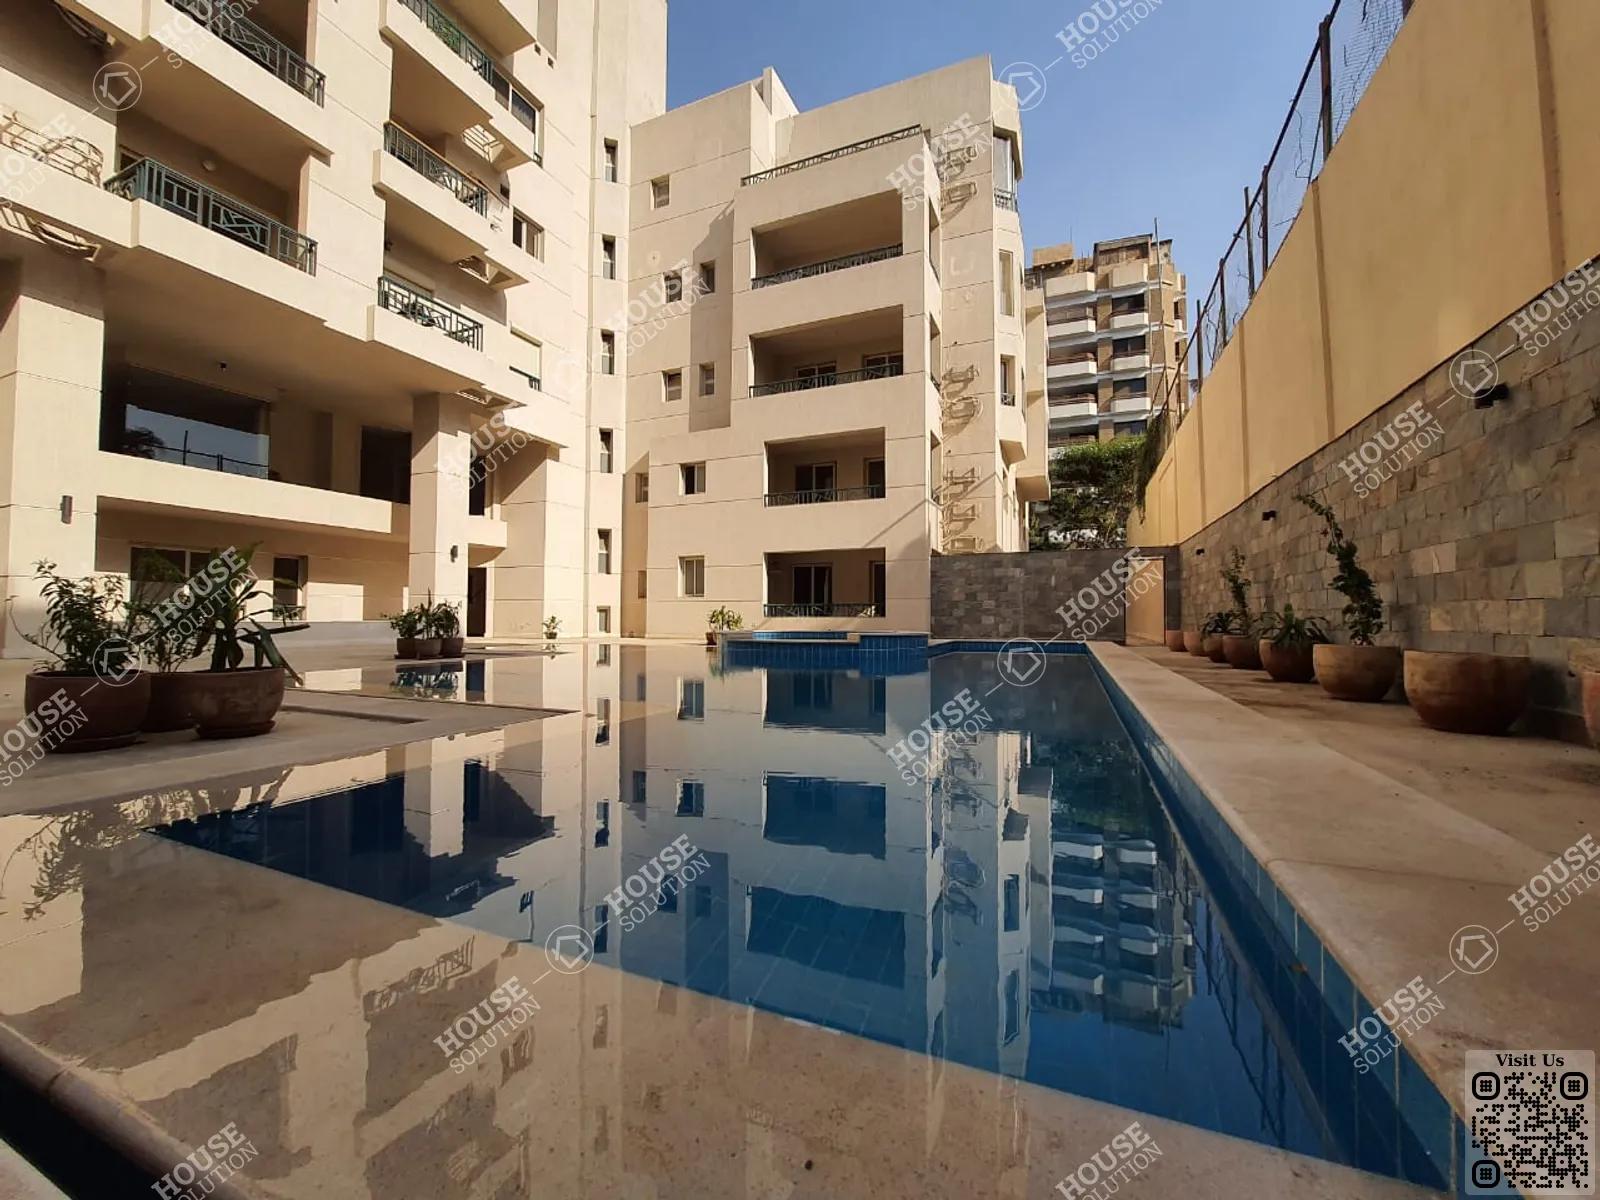 SHARED SWIMMING POOL  @ Ground Floors For Rent In Maadi Maadi Sarayat Area: 152 m² consists of 2 Bedrooms 2 Bathrooms Modern furnished 5 stars #5464-1